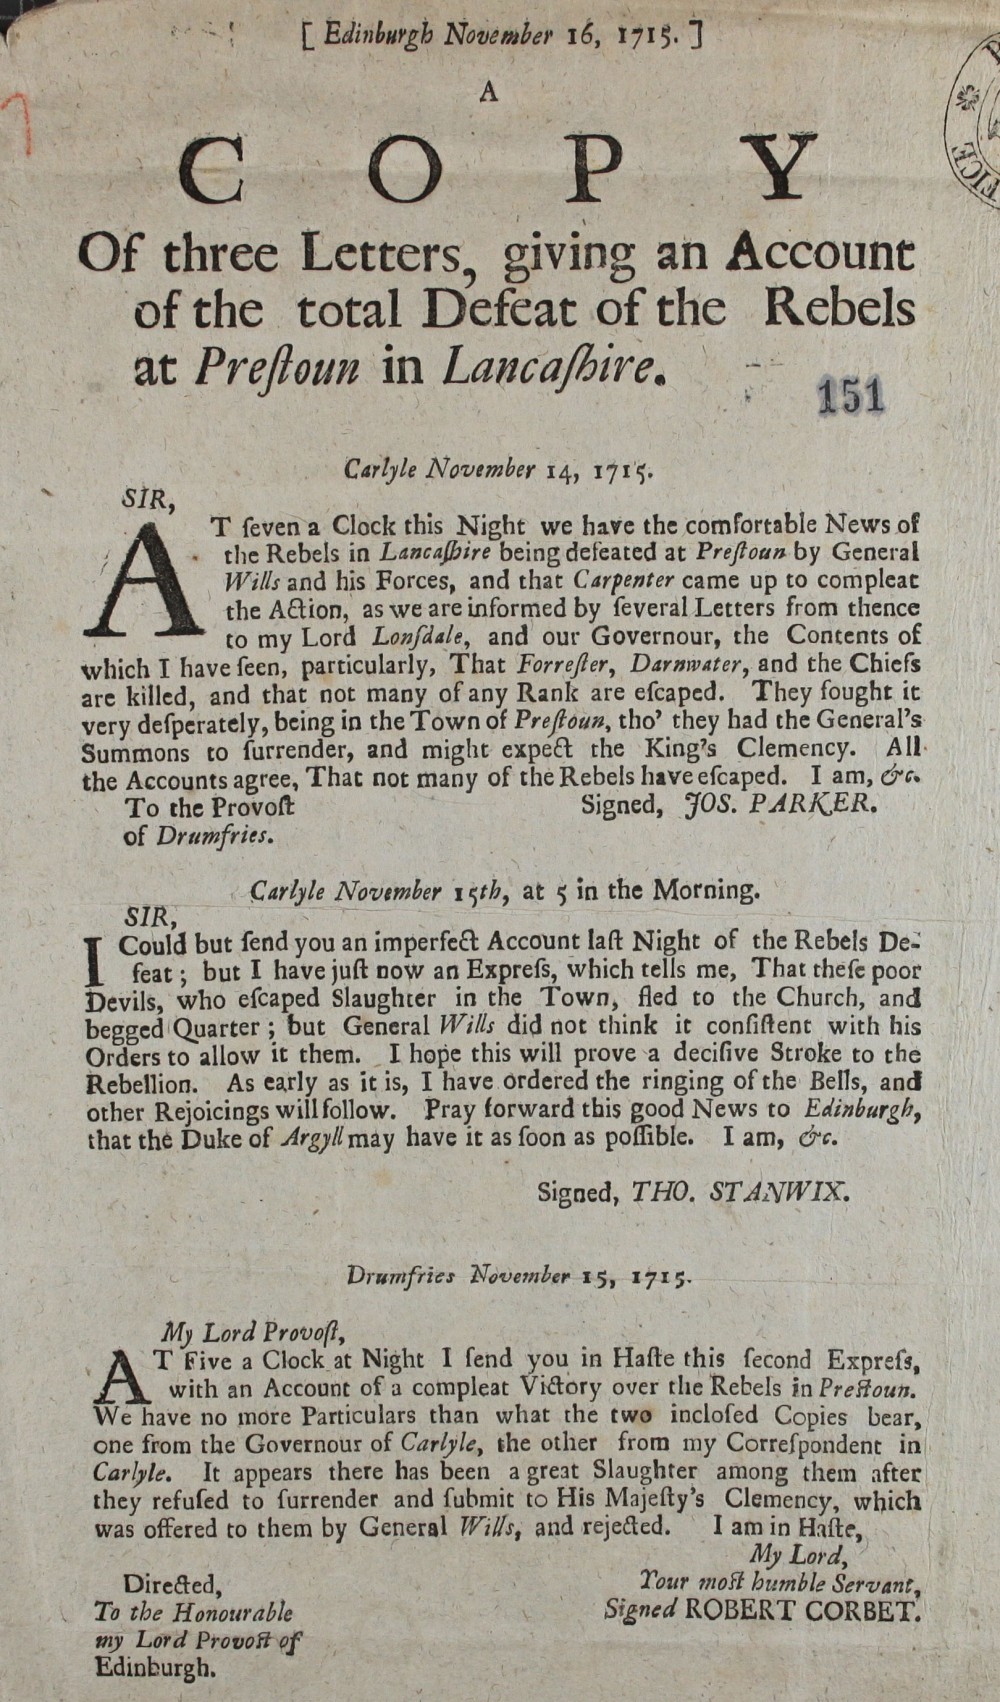 A pamphlet giving three accounts of the defeat of the Jacobites in Preston, Lancashire, dated from14th to 15 November 1715 (SP 54/10/57)